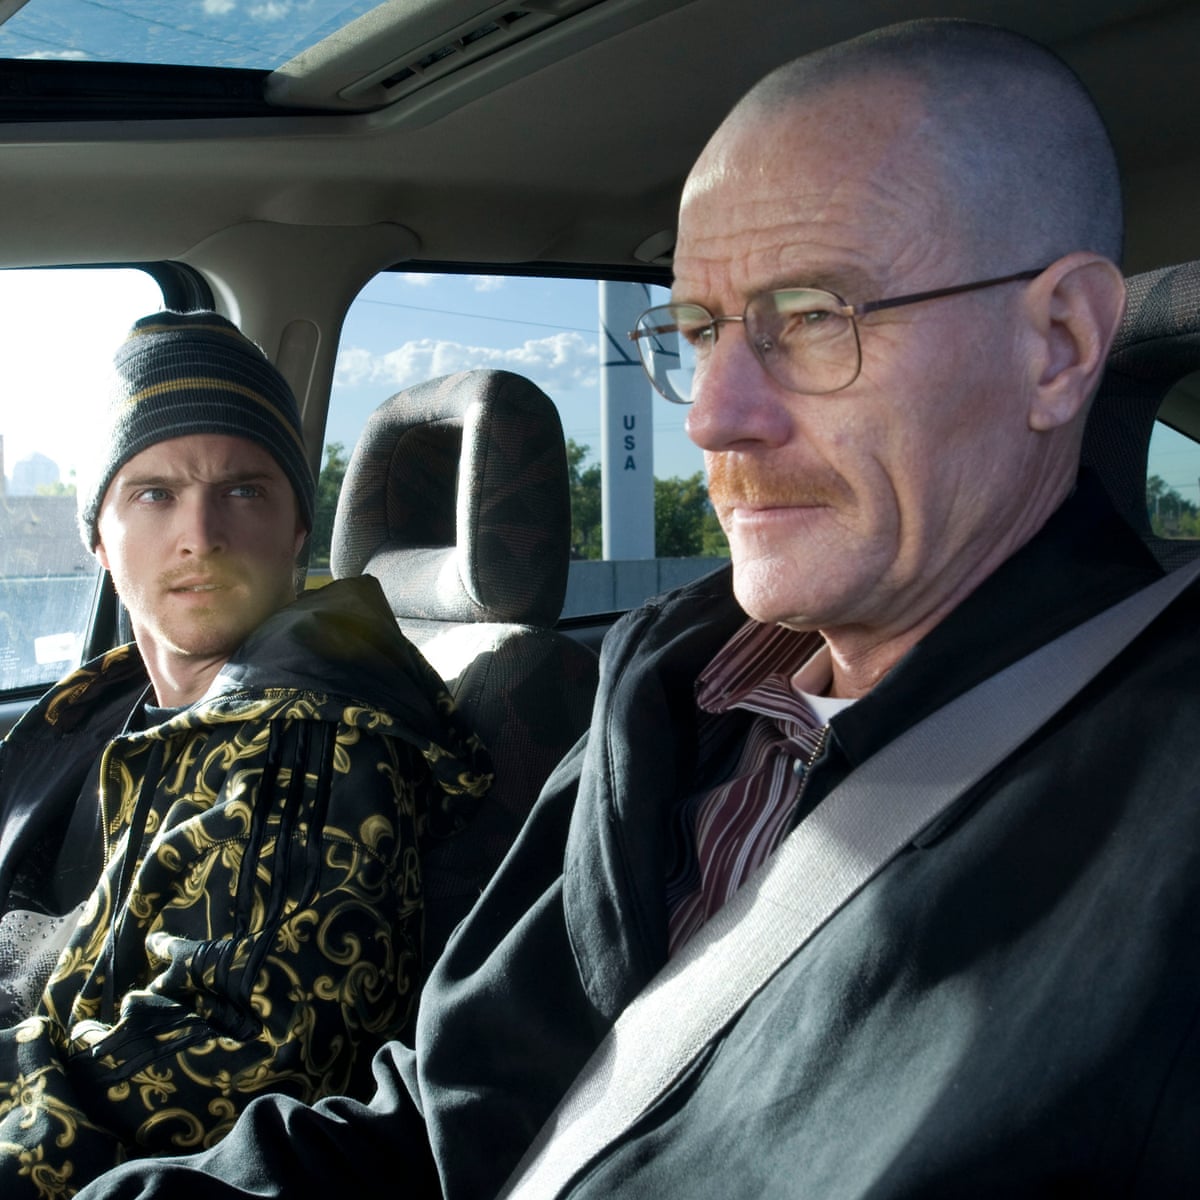 Albuquerque to unveil statues of Breaking Bad's Walter White and Jesse  Pinkman | Breaking Bad | The Guardian